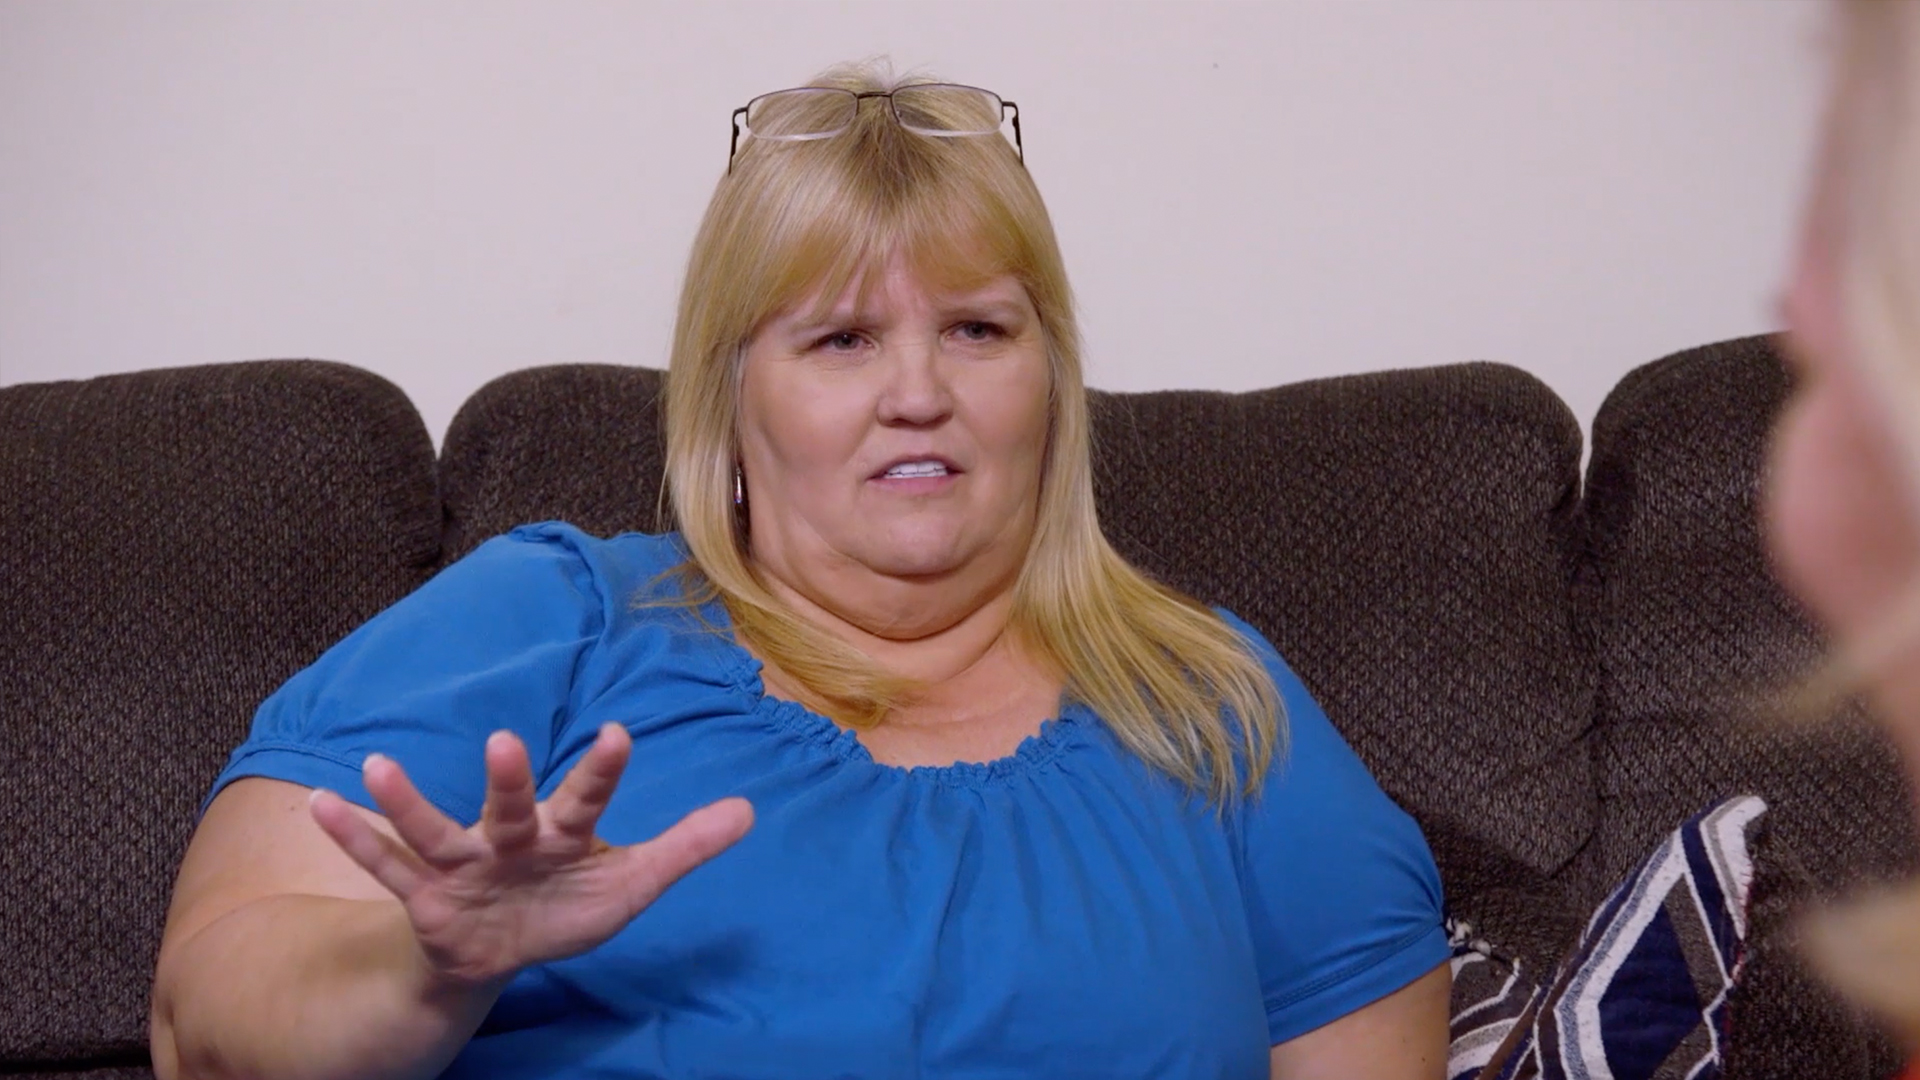 Watch 'She Has A LOT of Repairing to Do!' | Mama June: From Not to Hot Video Extras